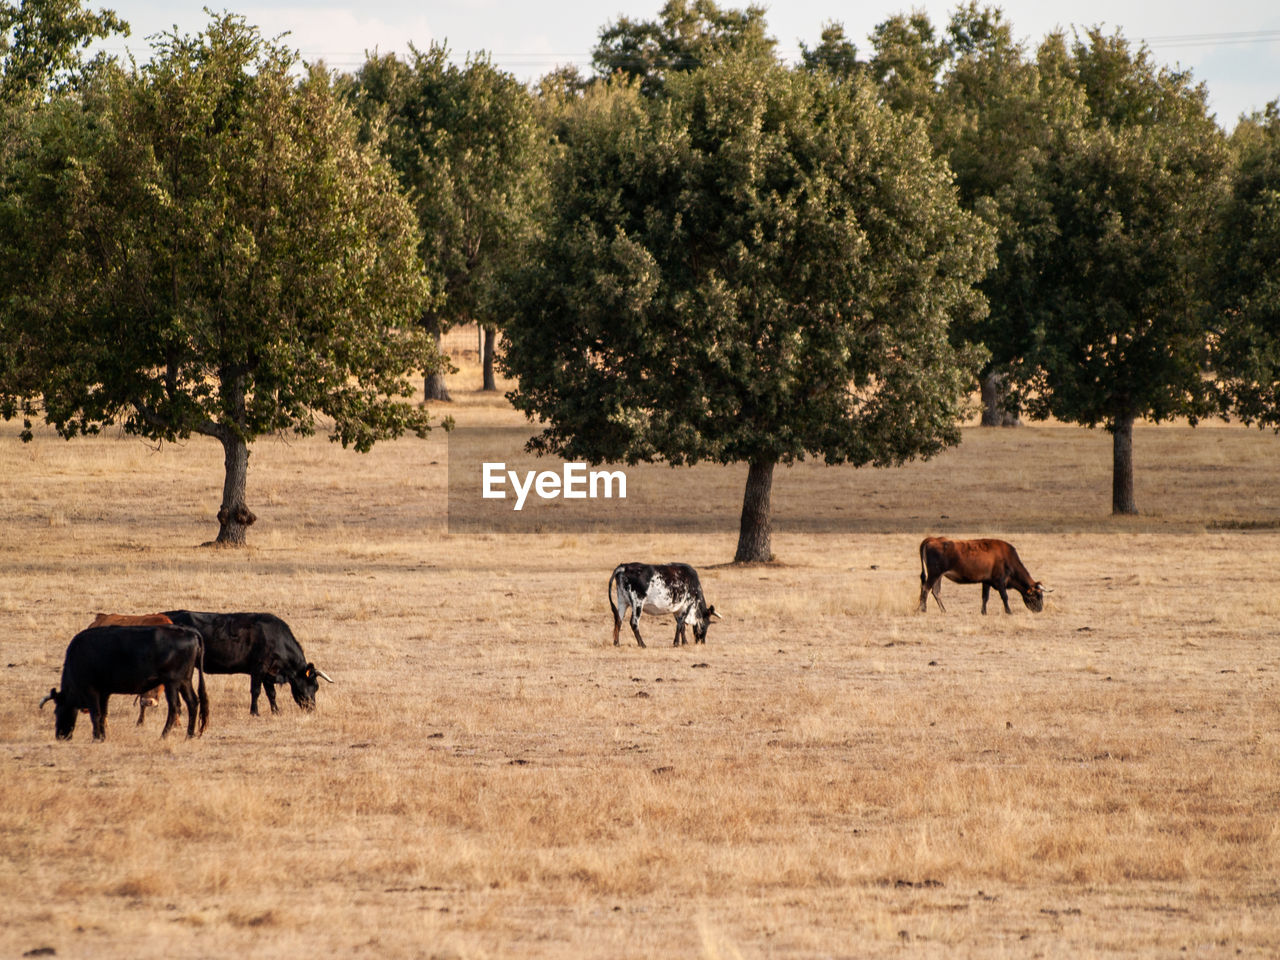 VIEW OF HORSES IN THE FIELD